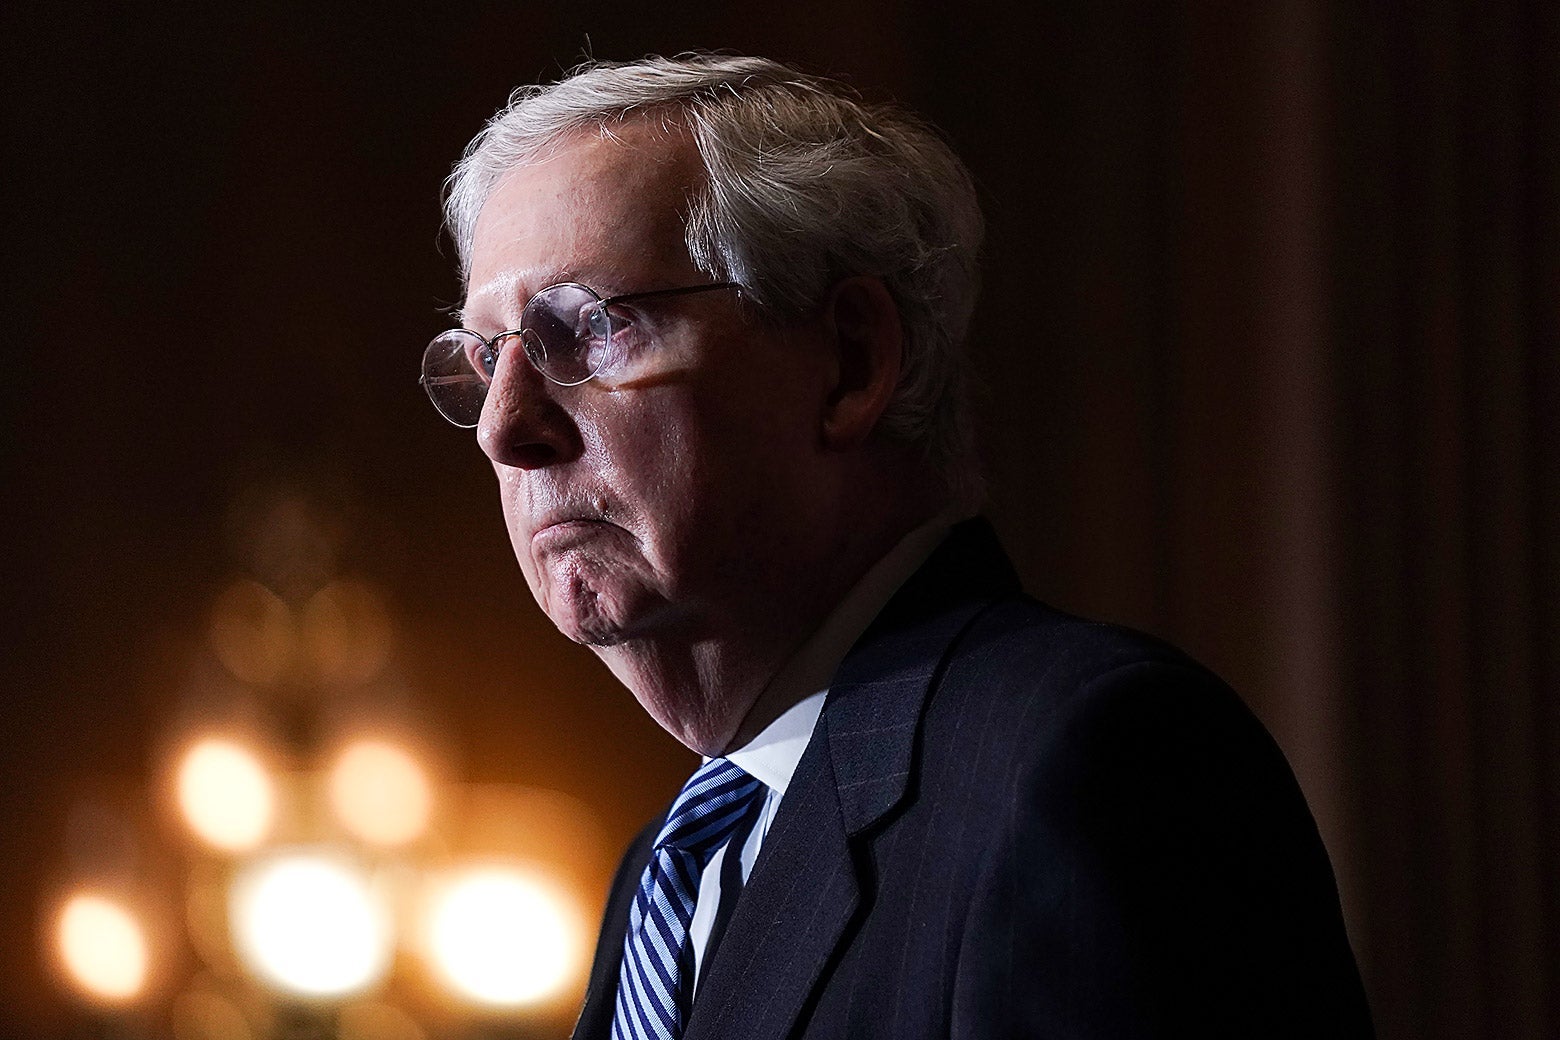 Mitch McConnell in profile.